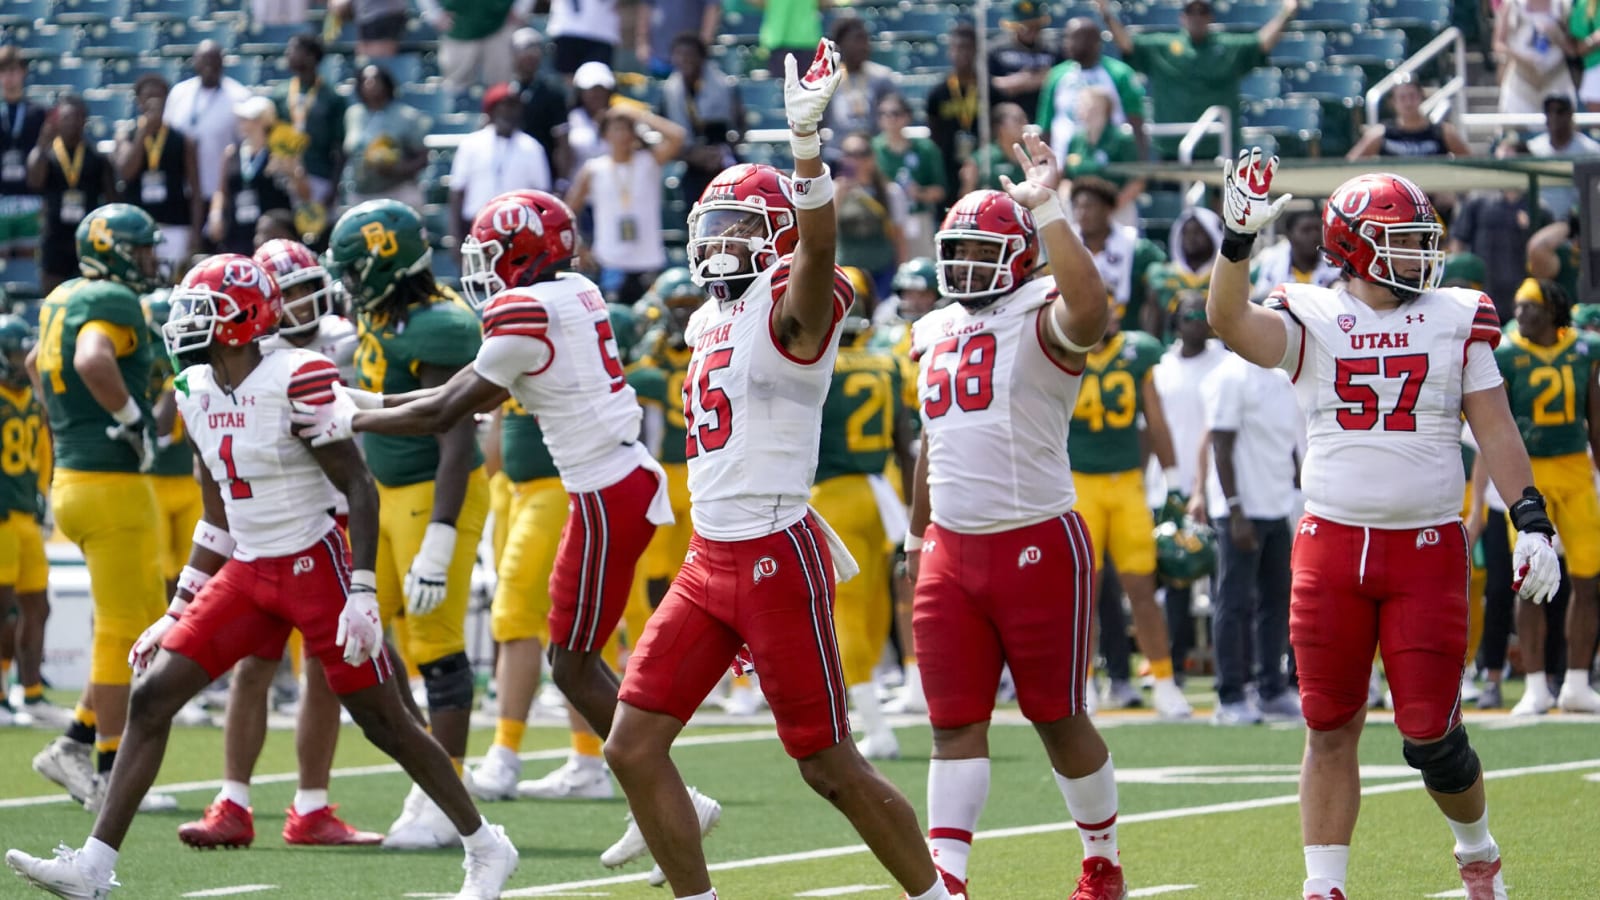 Watch: Utah beats Baylor on controversial play